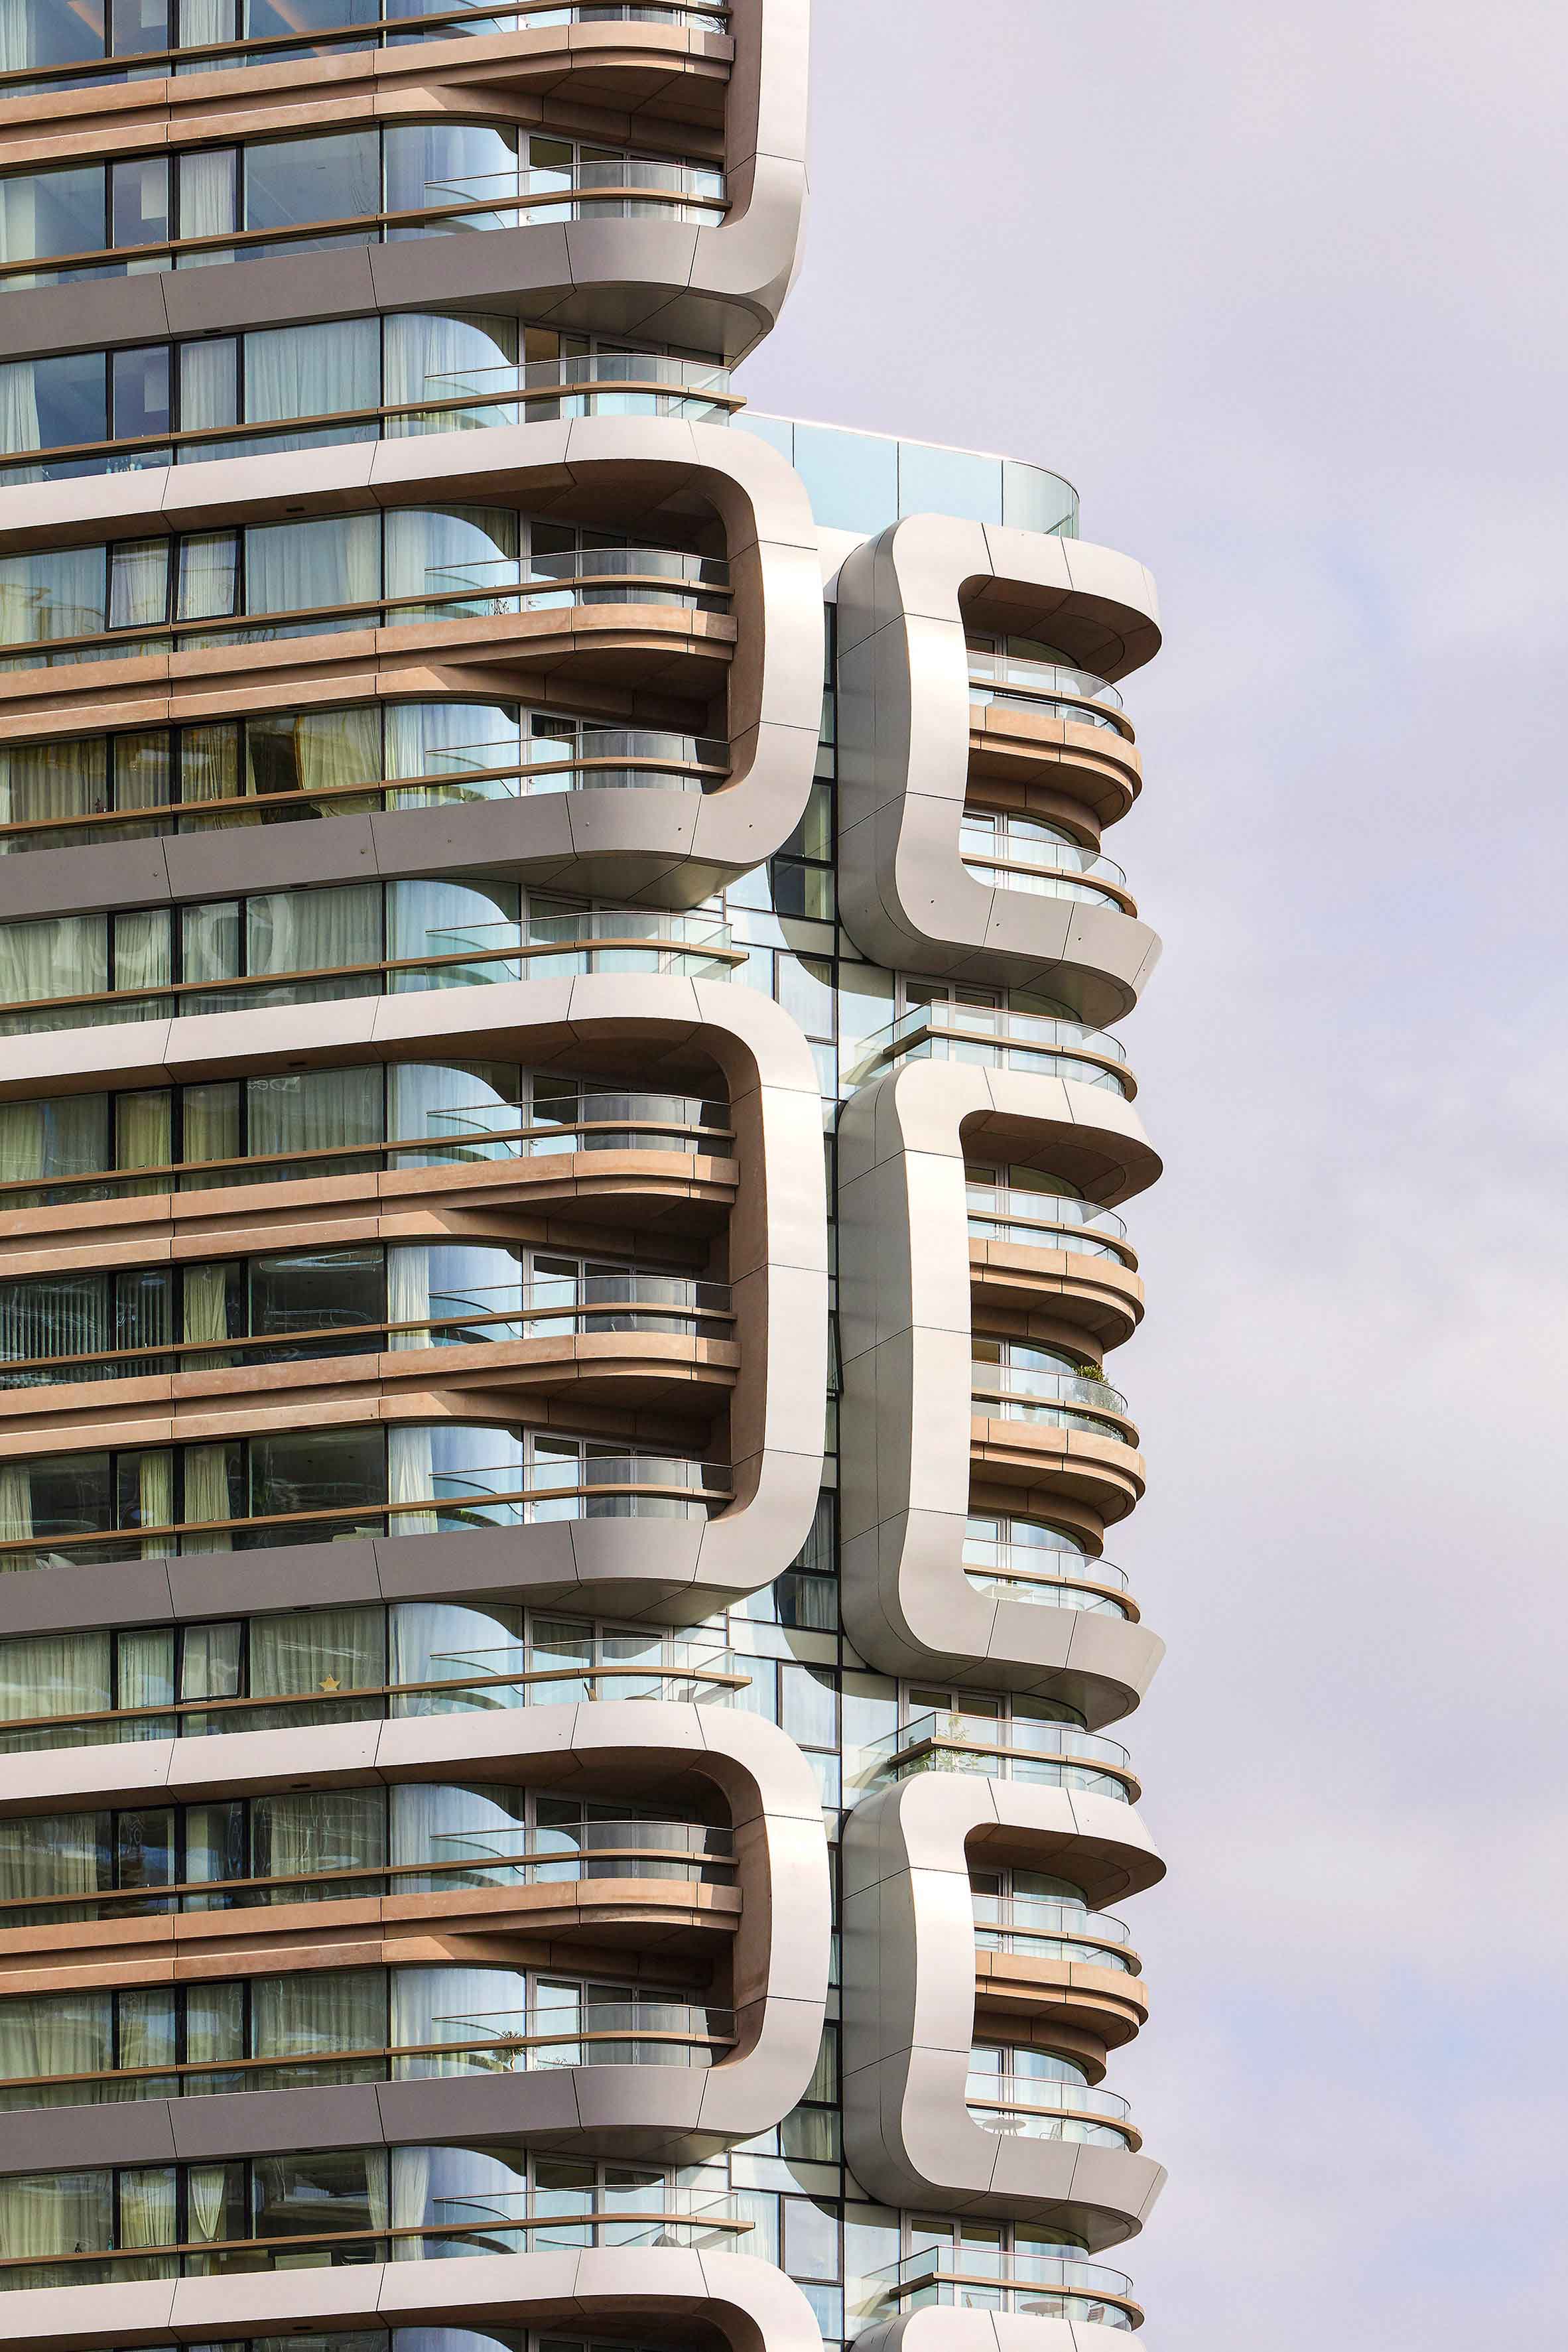 canaletto-tower-unstudio-architecture-residential-towers-uk_dezeen_2364_col_7.jpg